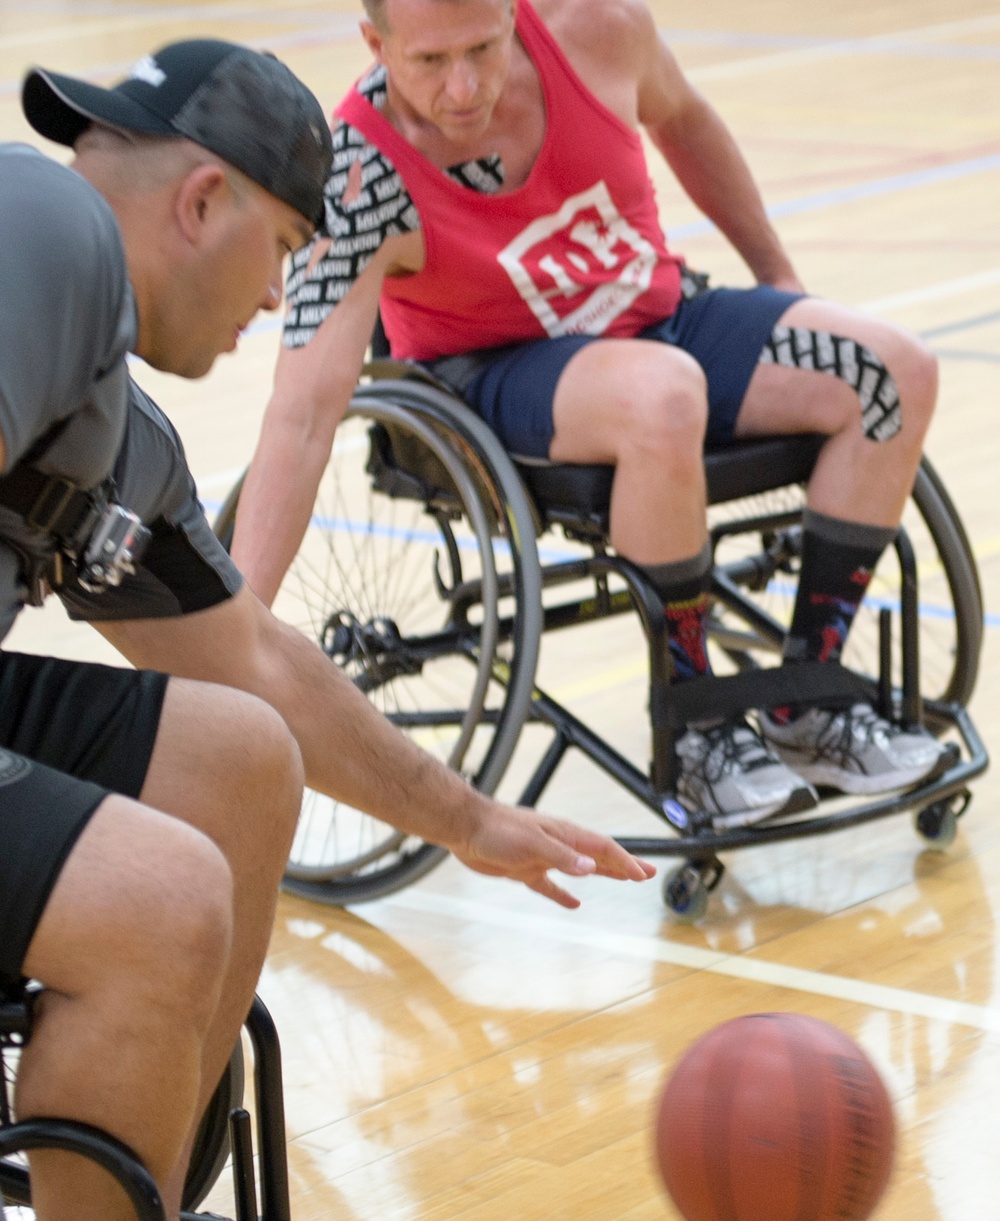 U.S. Special Operations Command’s 2017 DOD Warrior Games tryouts